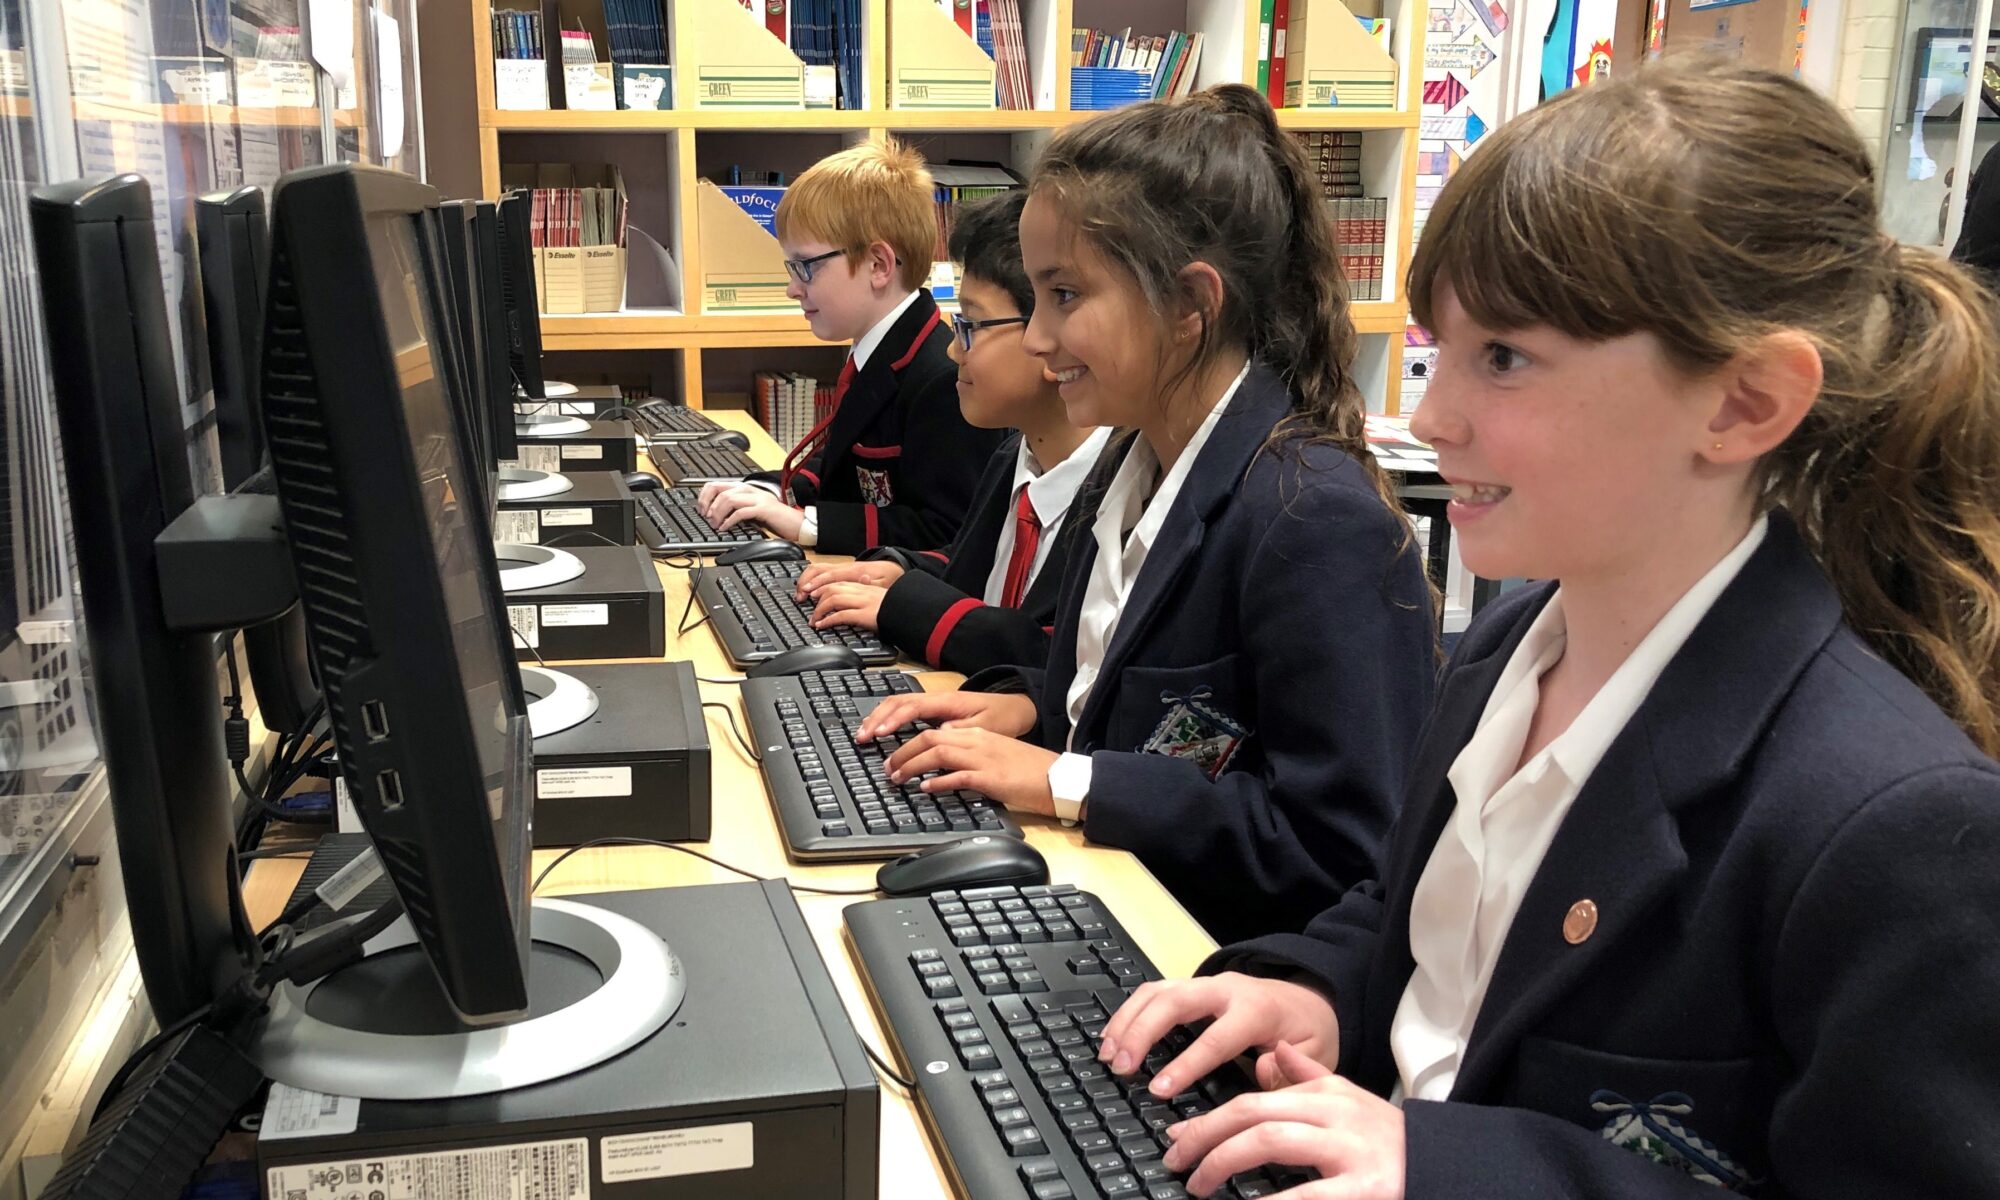 Students entering the AKZ Worldwide Touch Typing Tournament